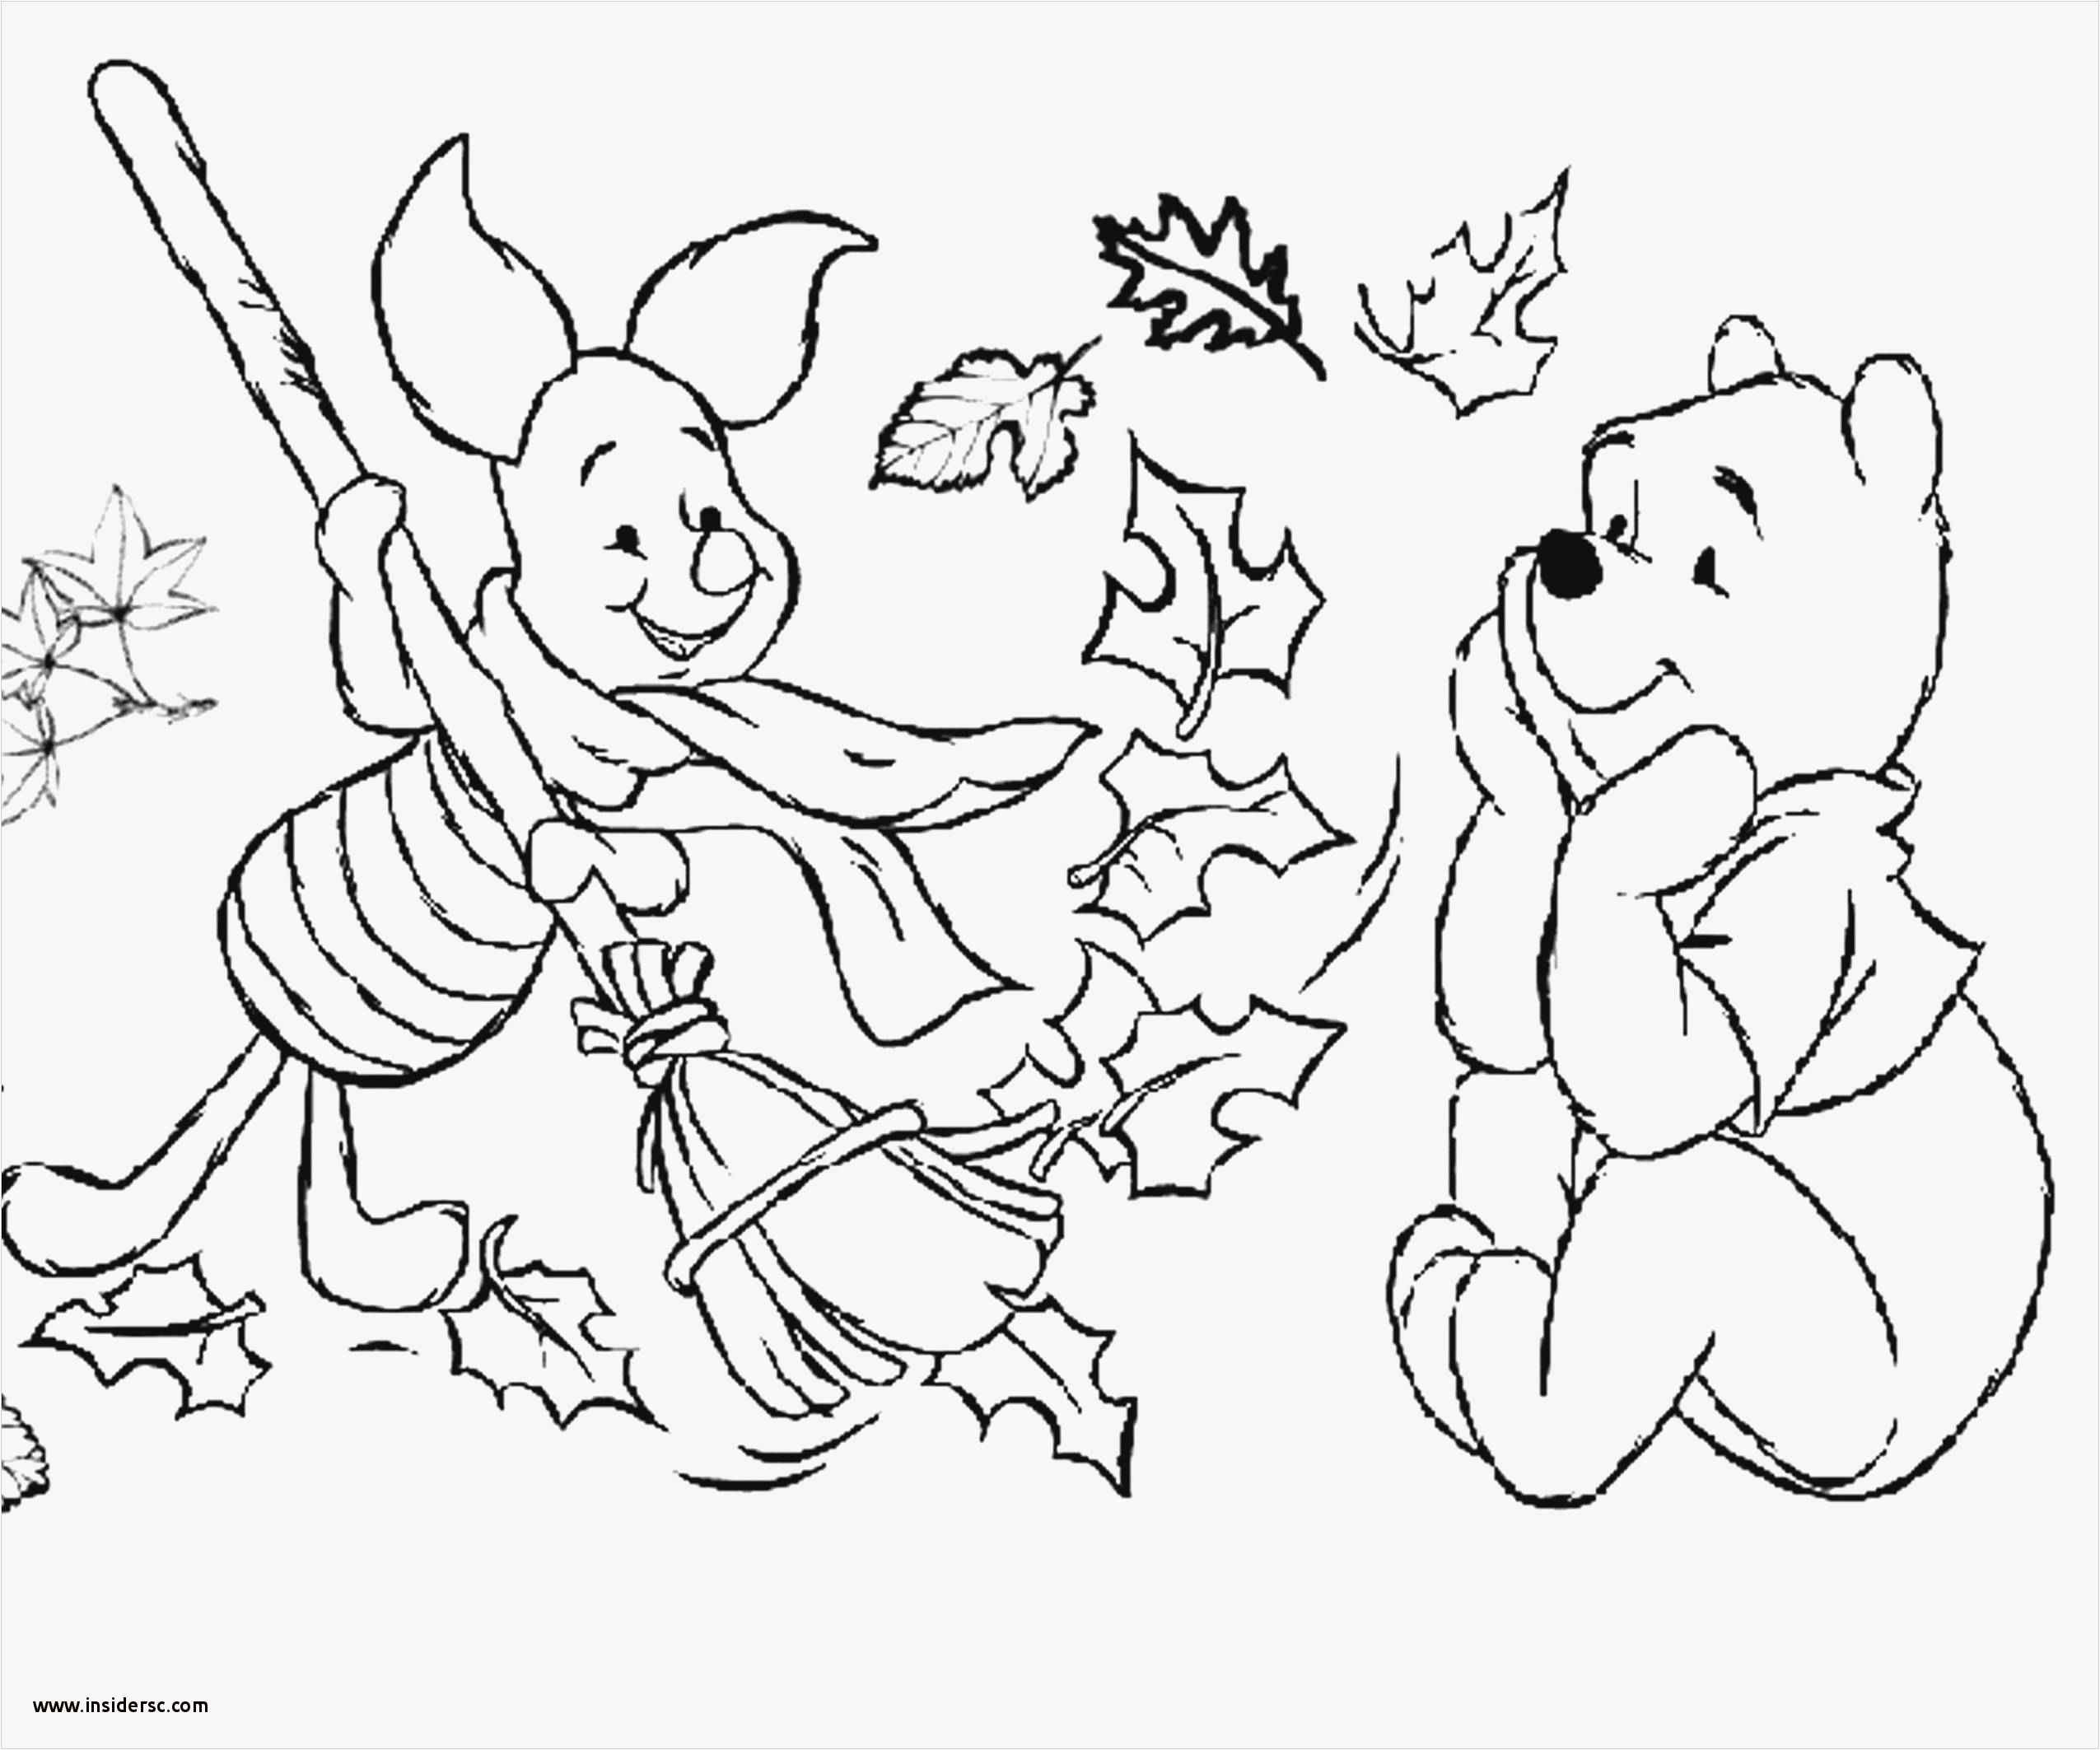 Pilgrim Coloring Pages Best Of Thanksgiving Pilgrim Coloring Pages Qulu